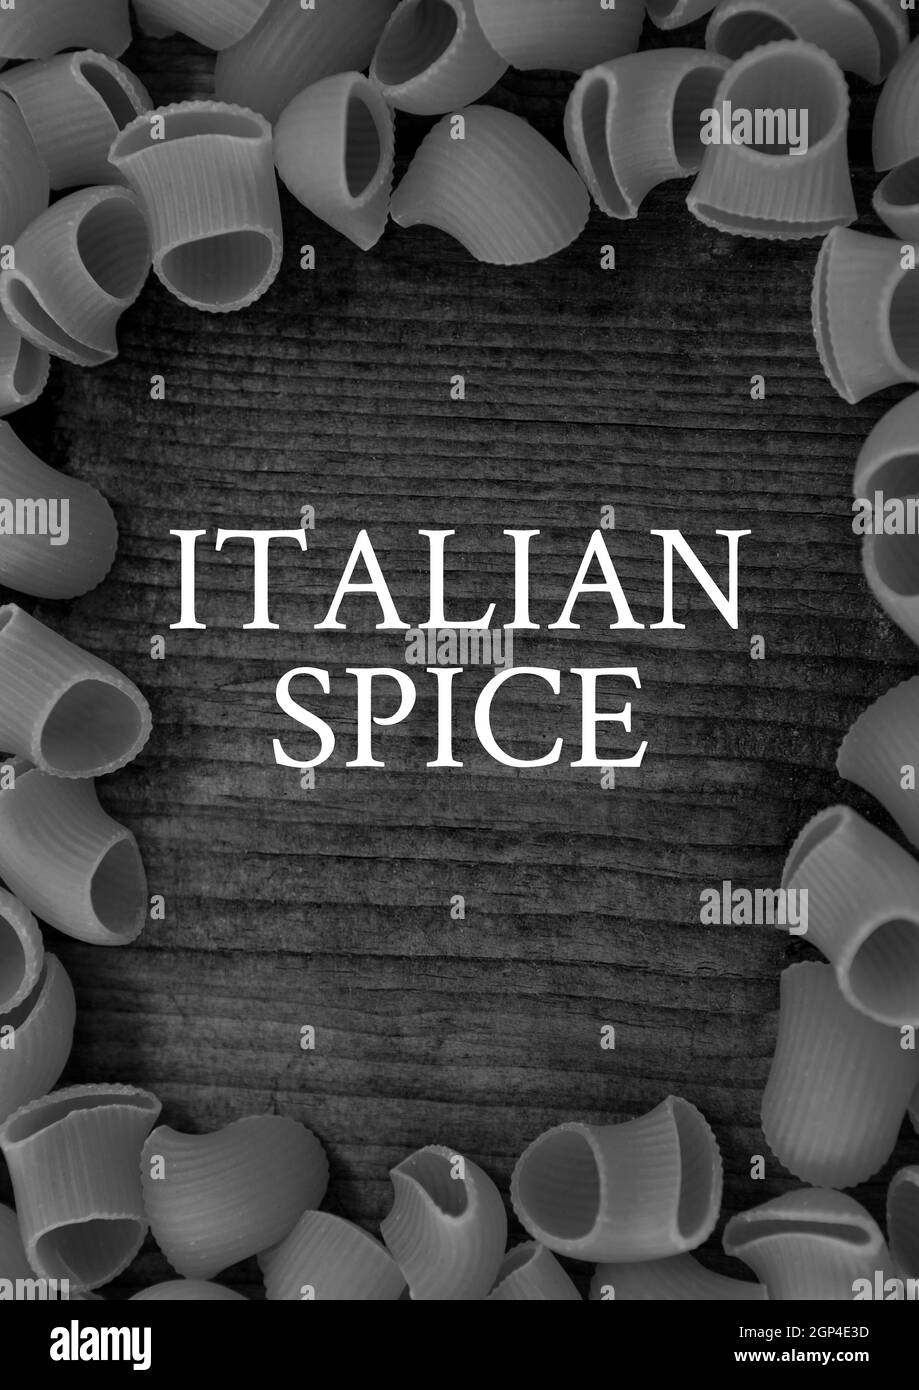 Composition of italian spice text and black and white pasta on gray background Stock Photo